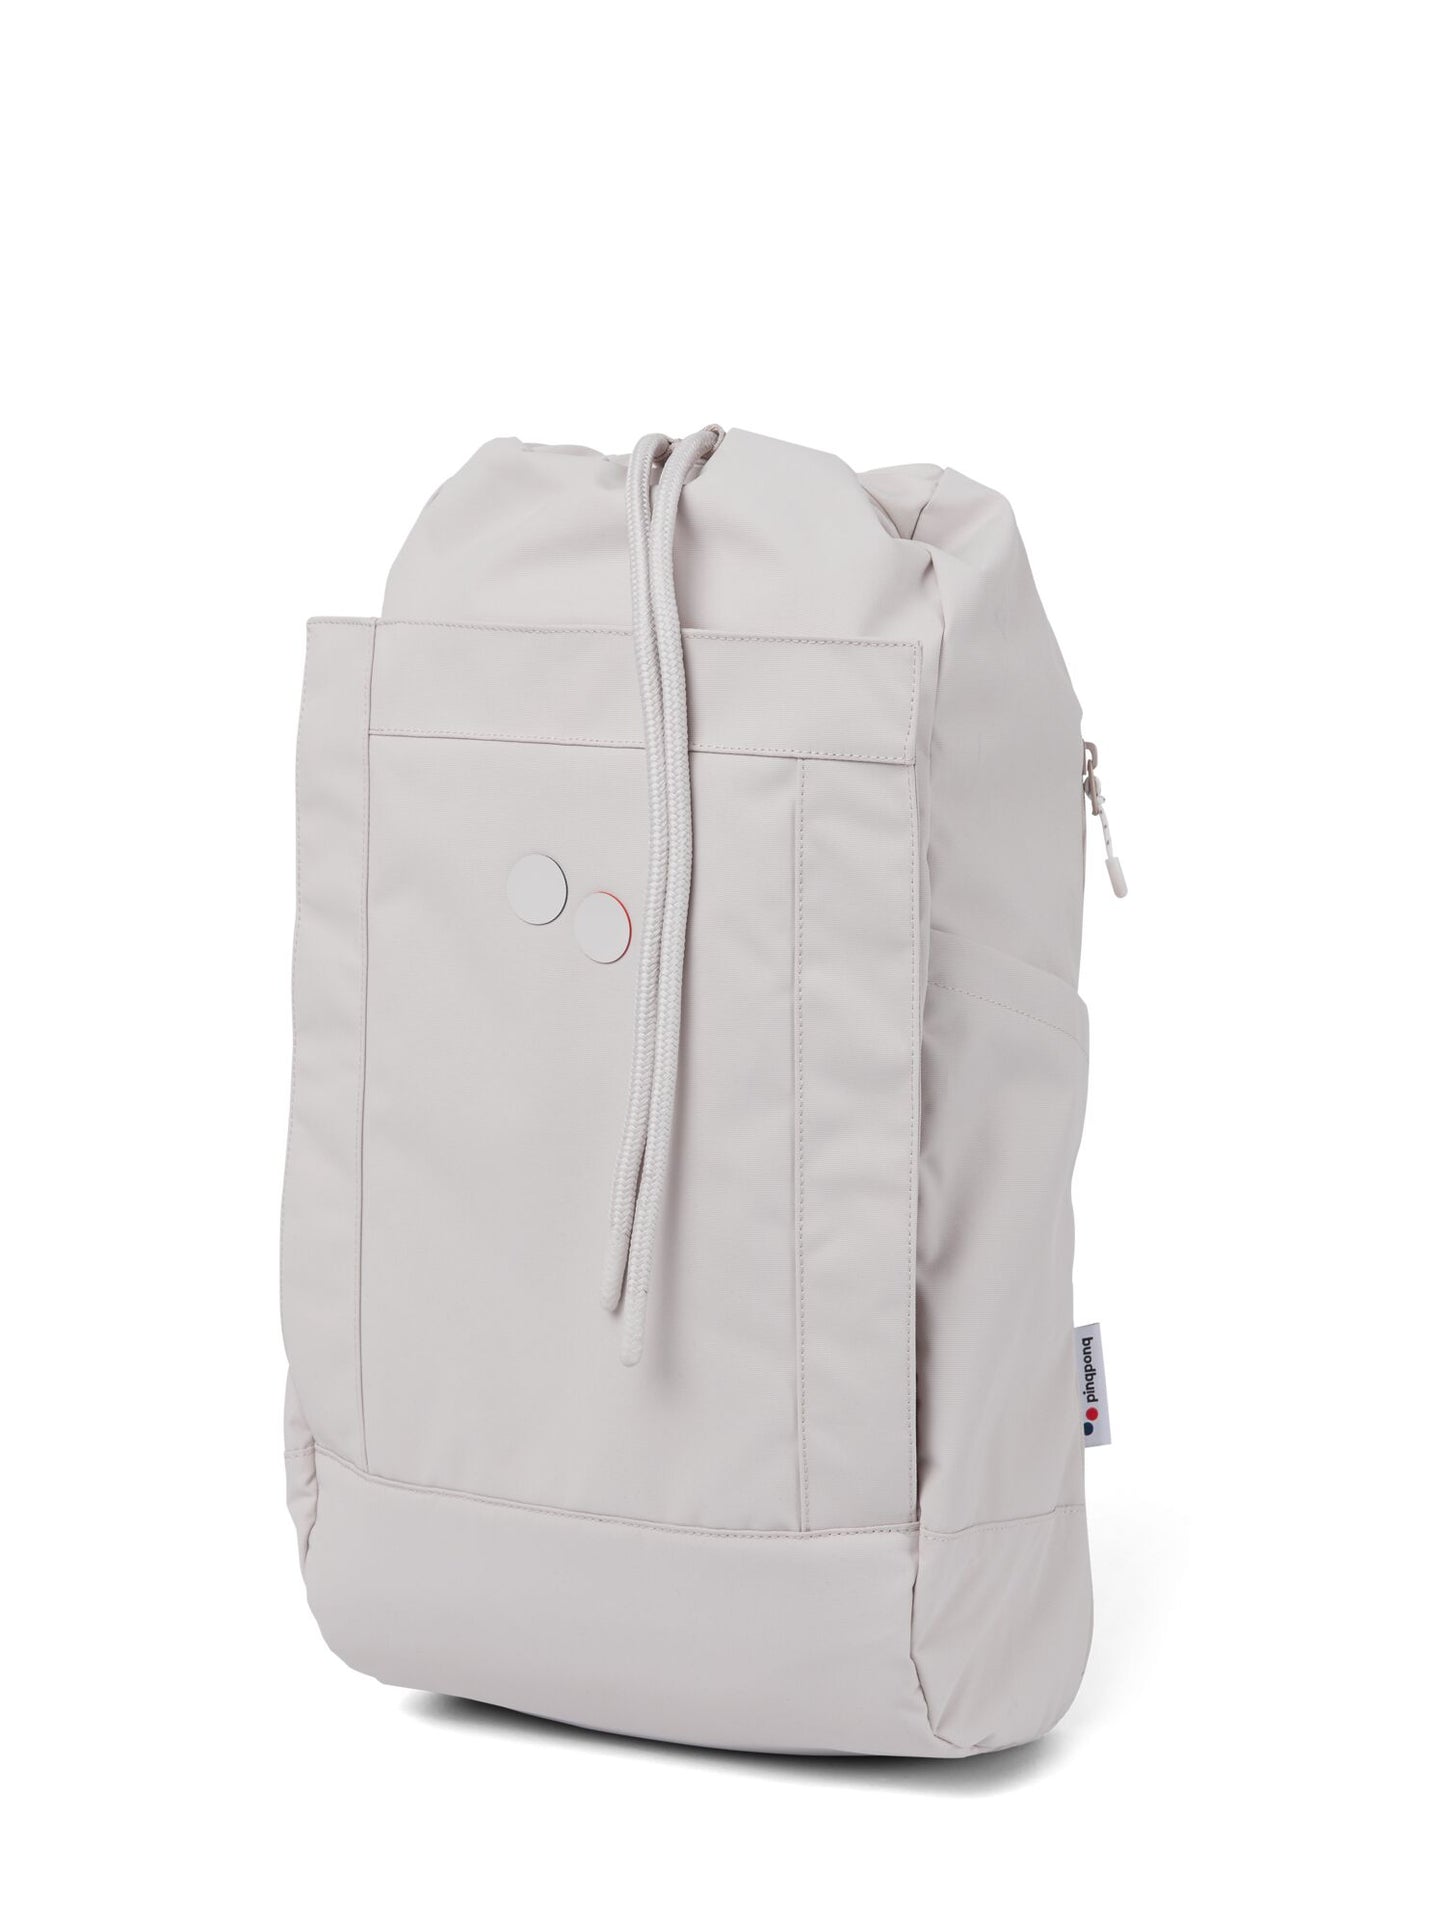 pinqponq-backpack-Kalm-Cliff-Beige-front